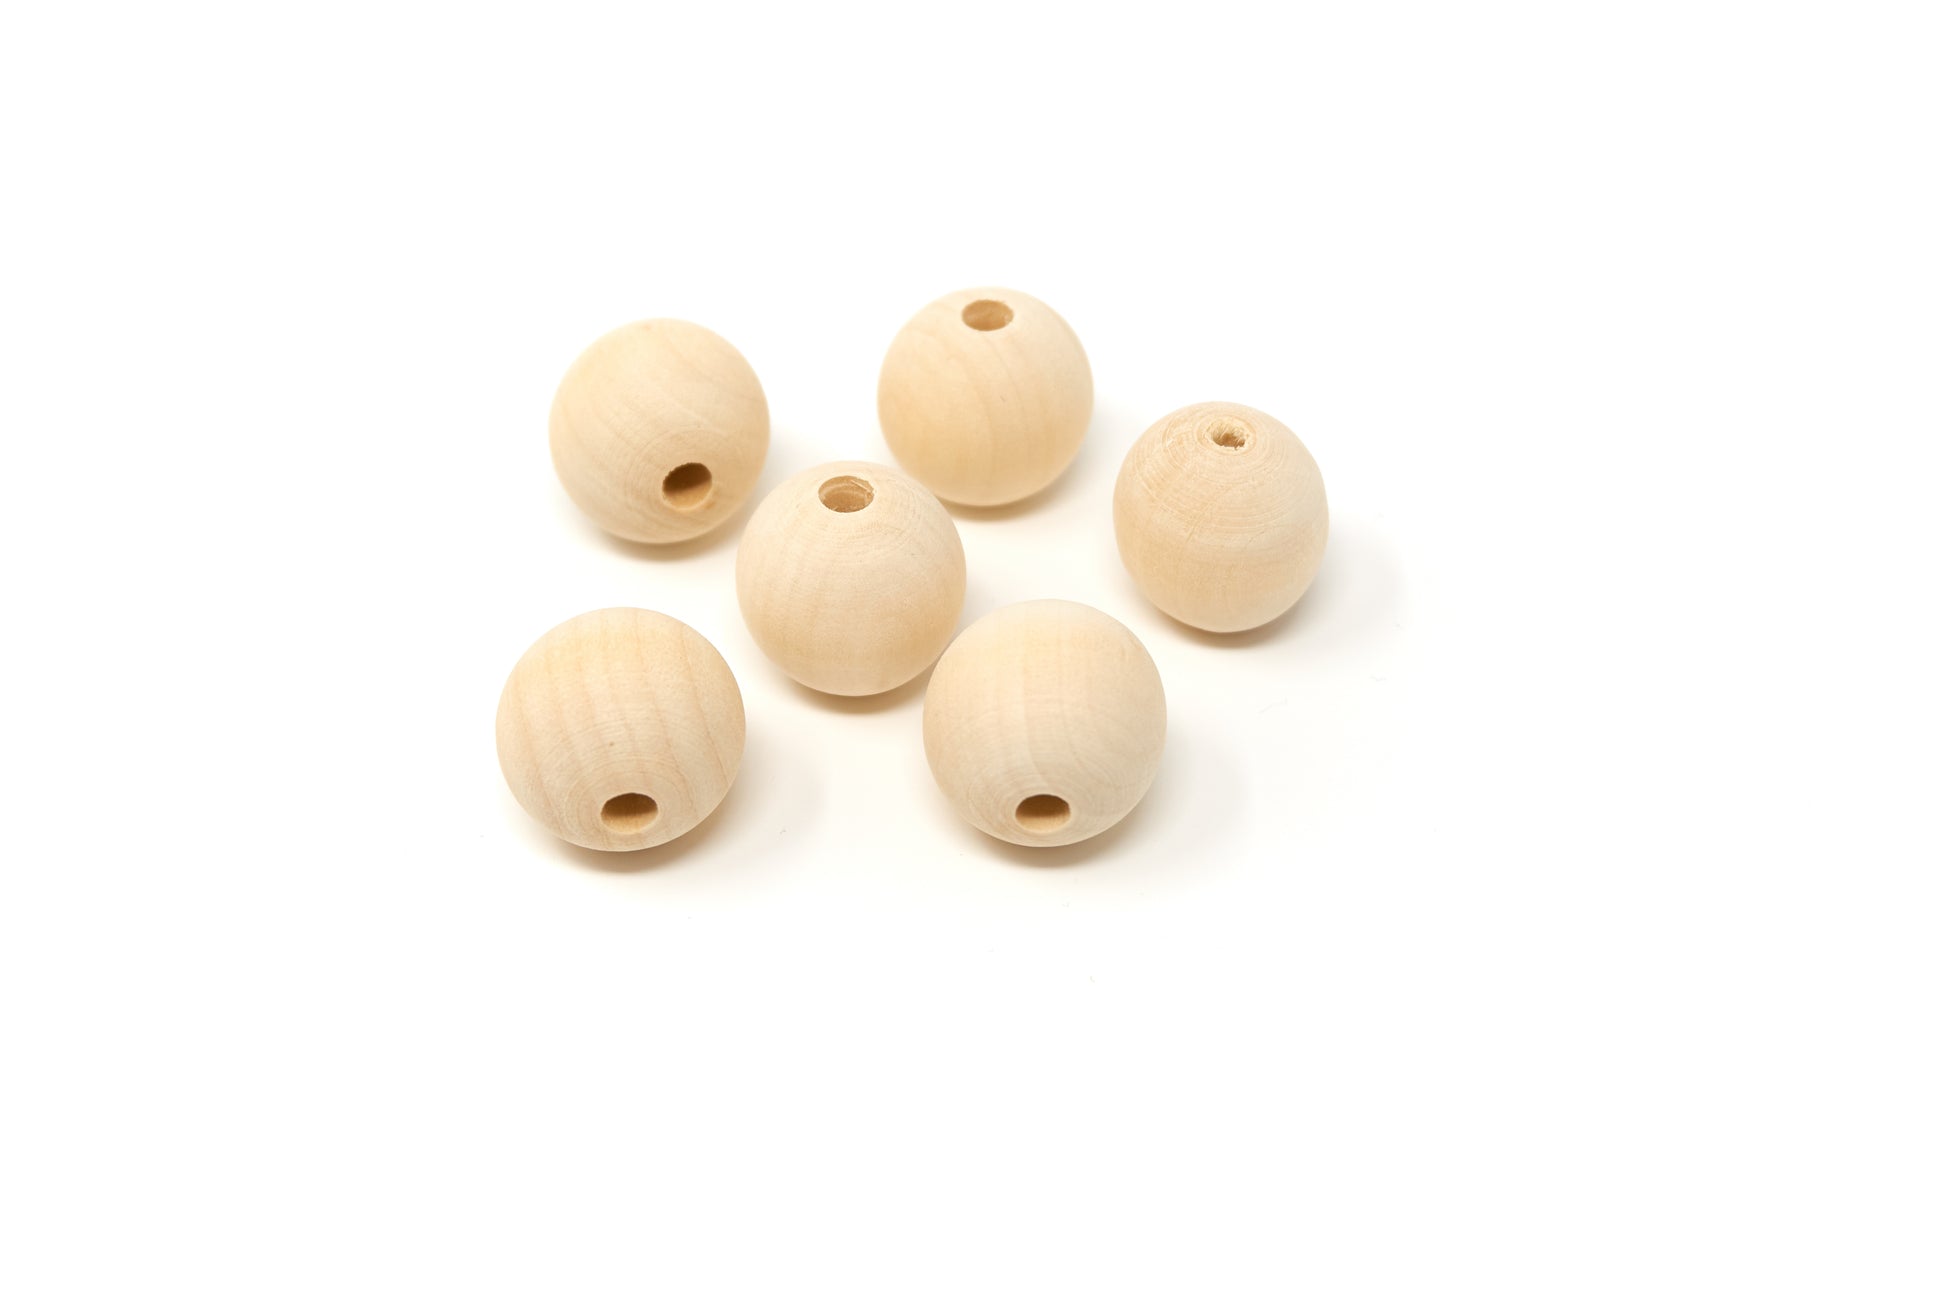 Natural Round Wood Beads 18mm 20 pieces - Cameos Art Shop